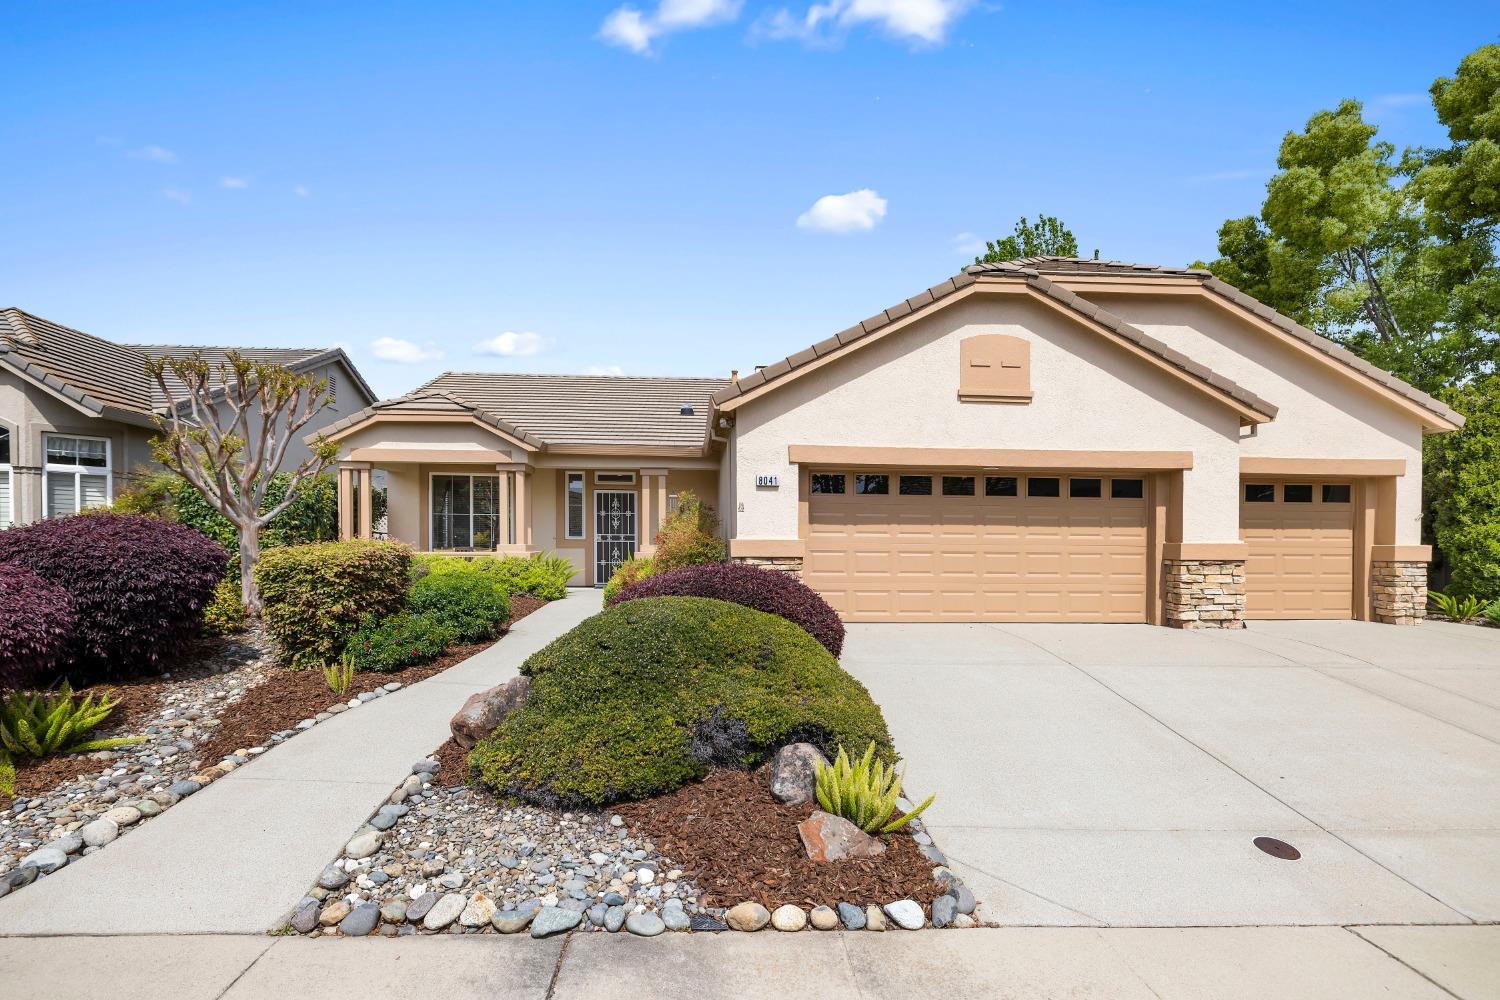 Photo of 8041 Steamboat Ln in Roseville, CA